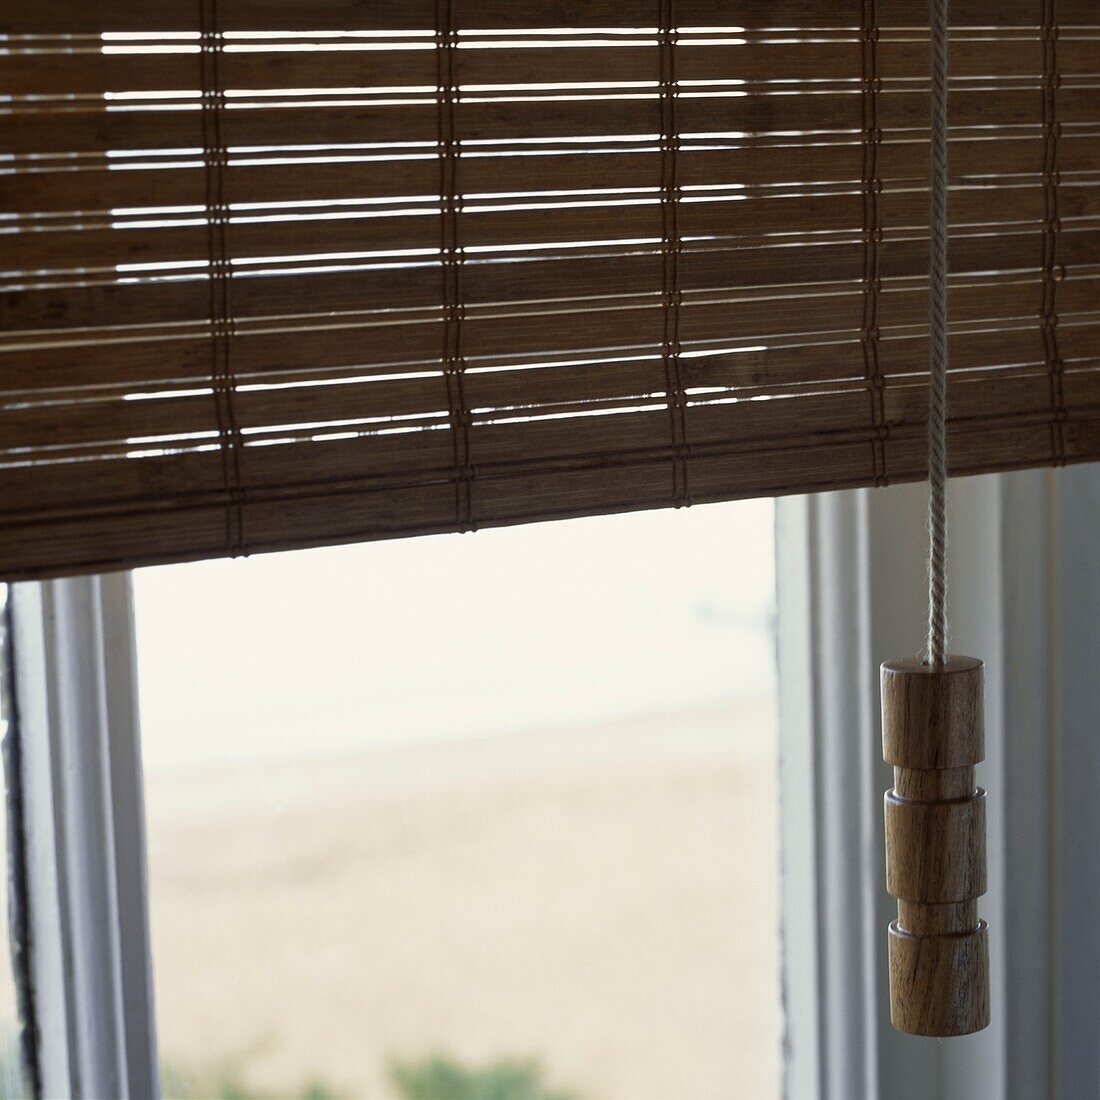 Window treatment wooden blind and blind pull